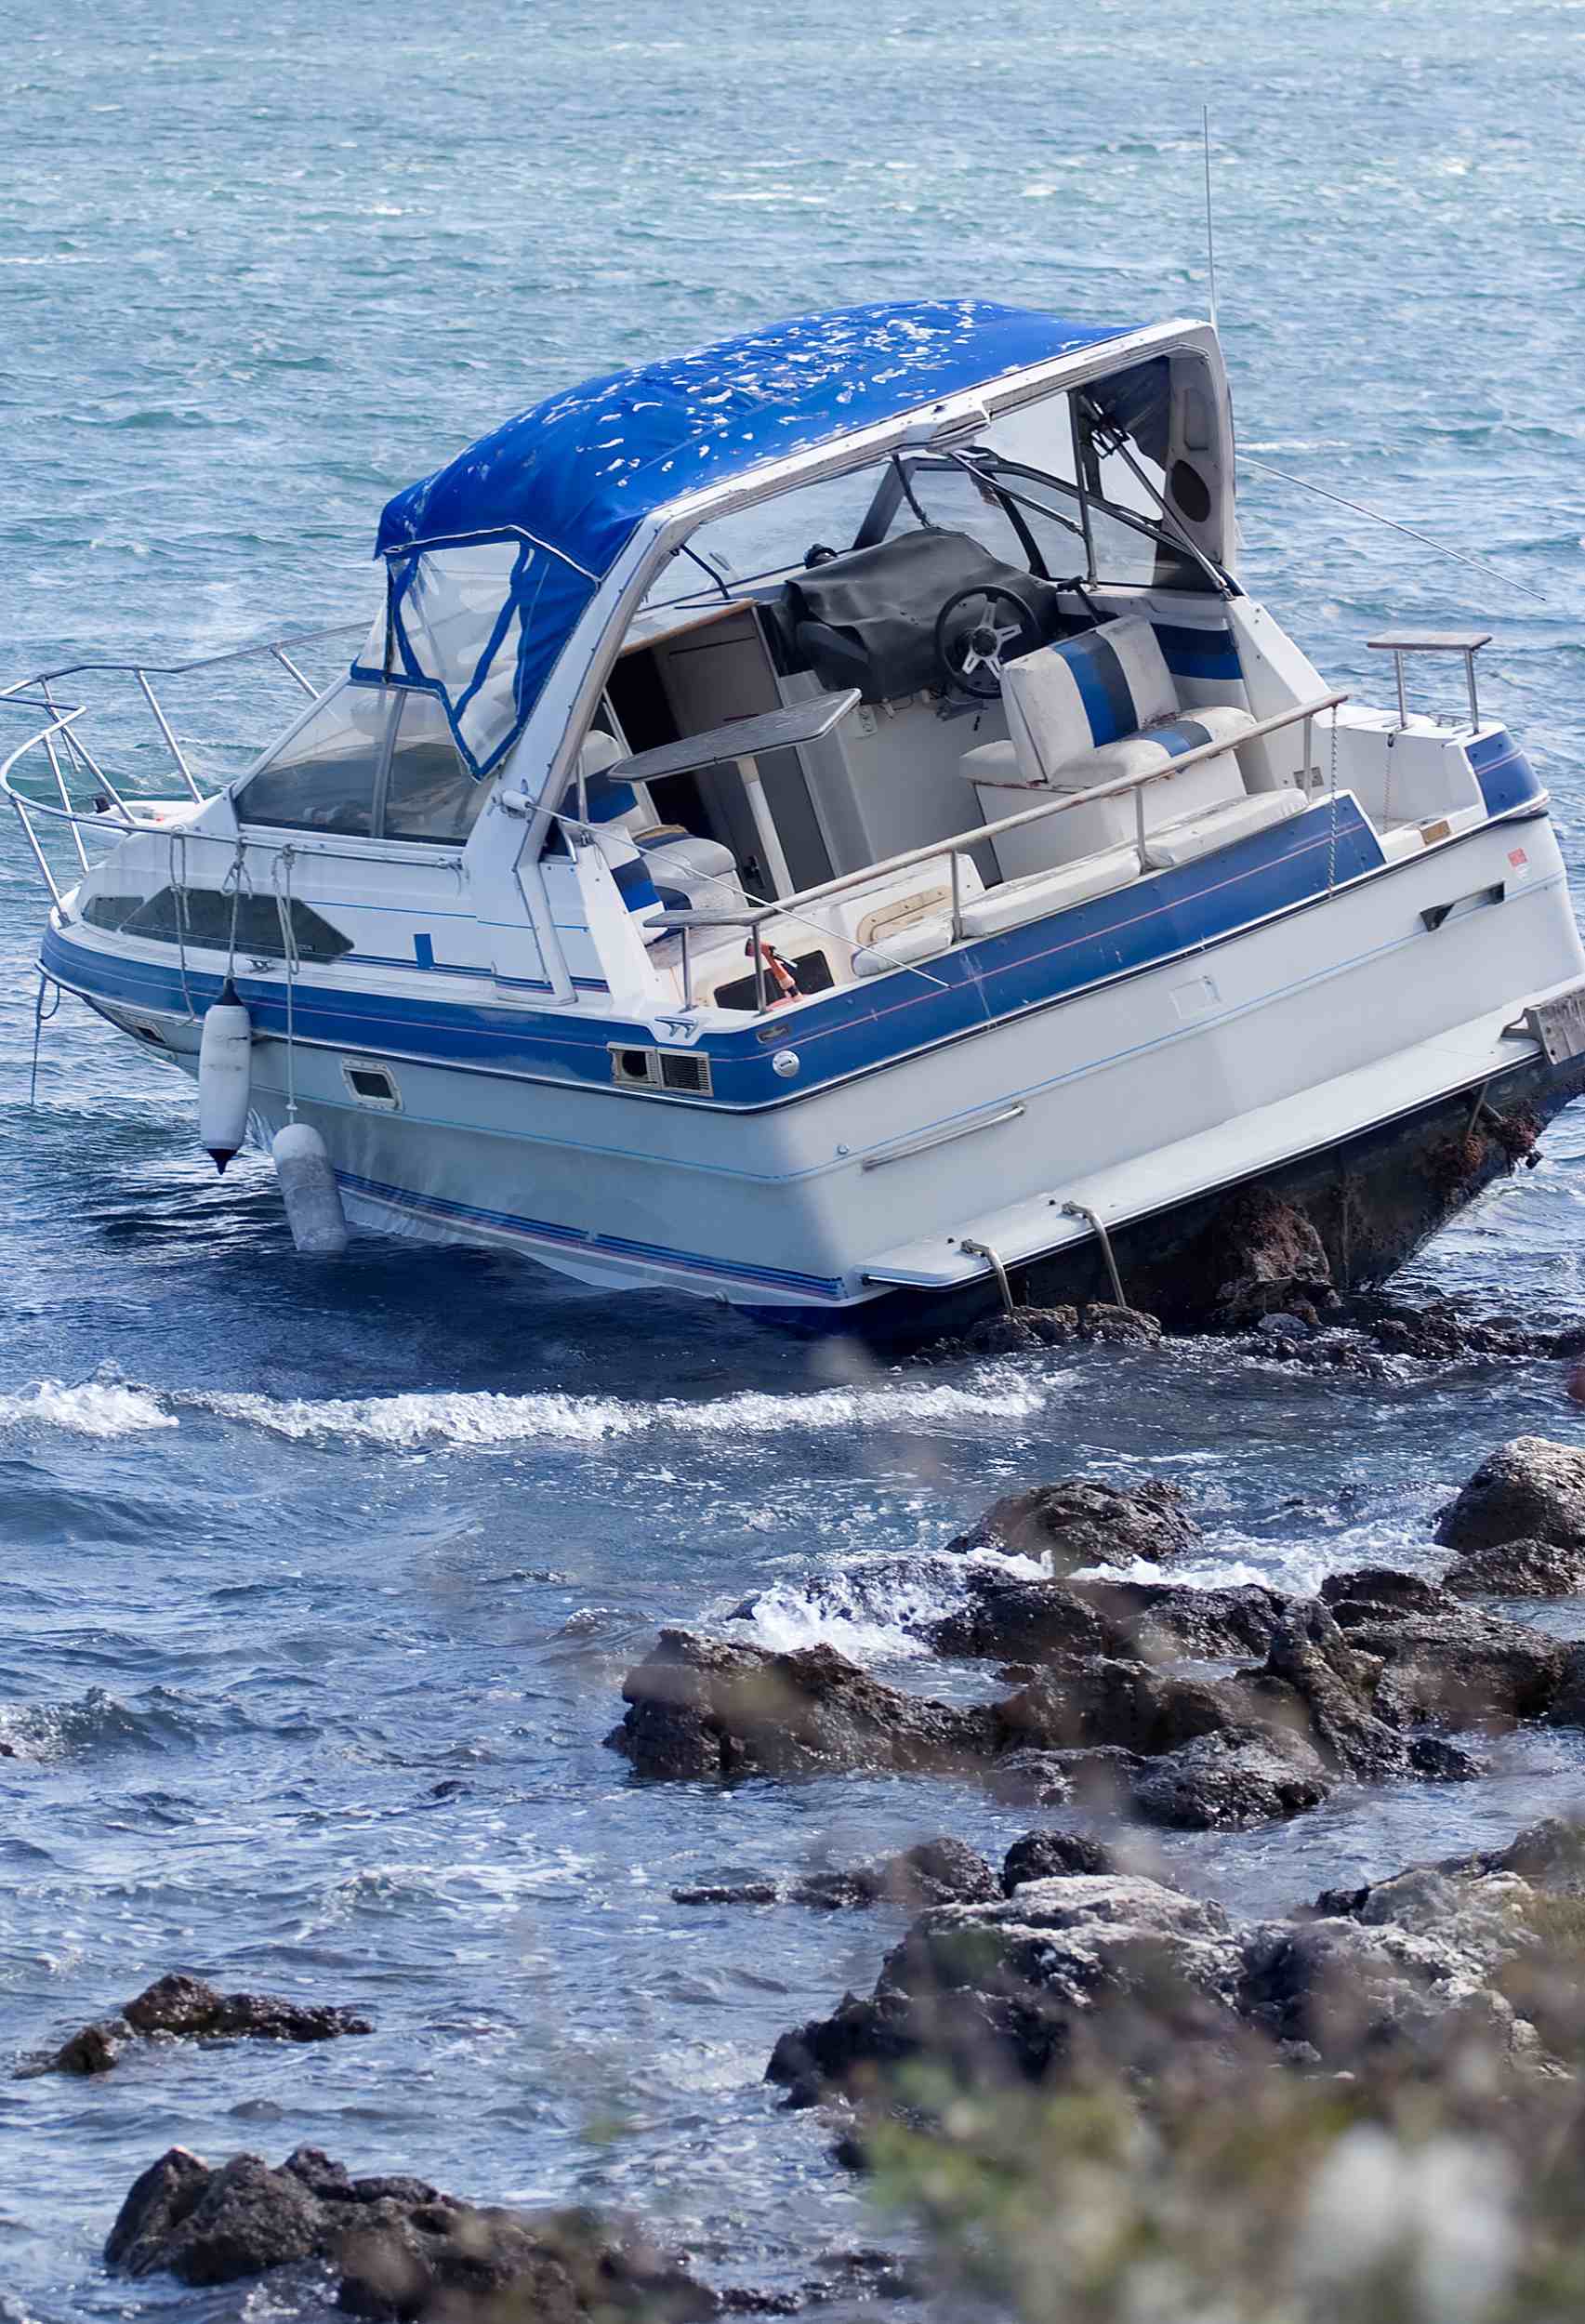 Understanding the Importance of Legal Representation After a Boat Accident